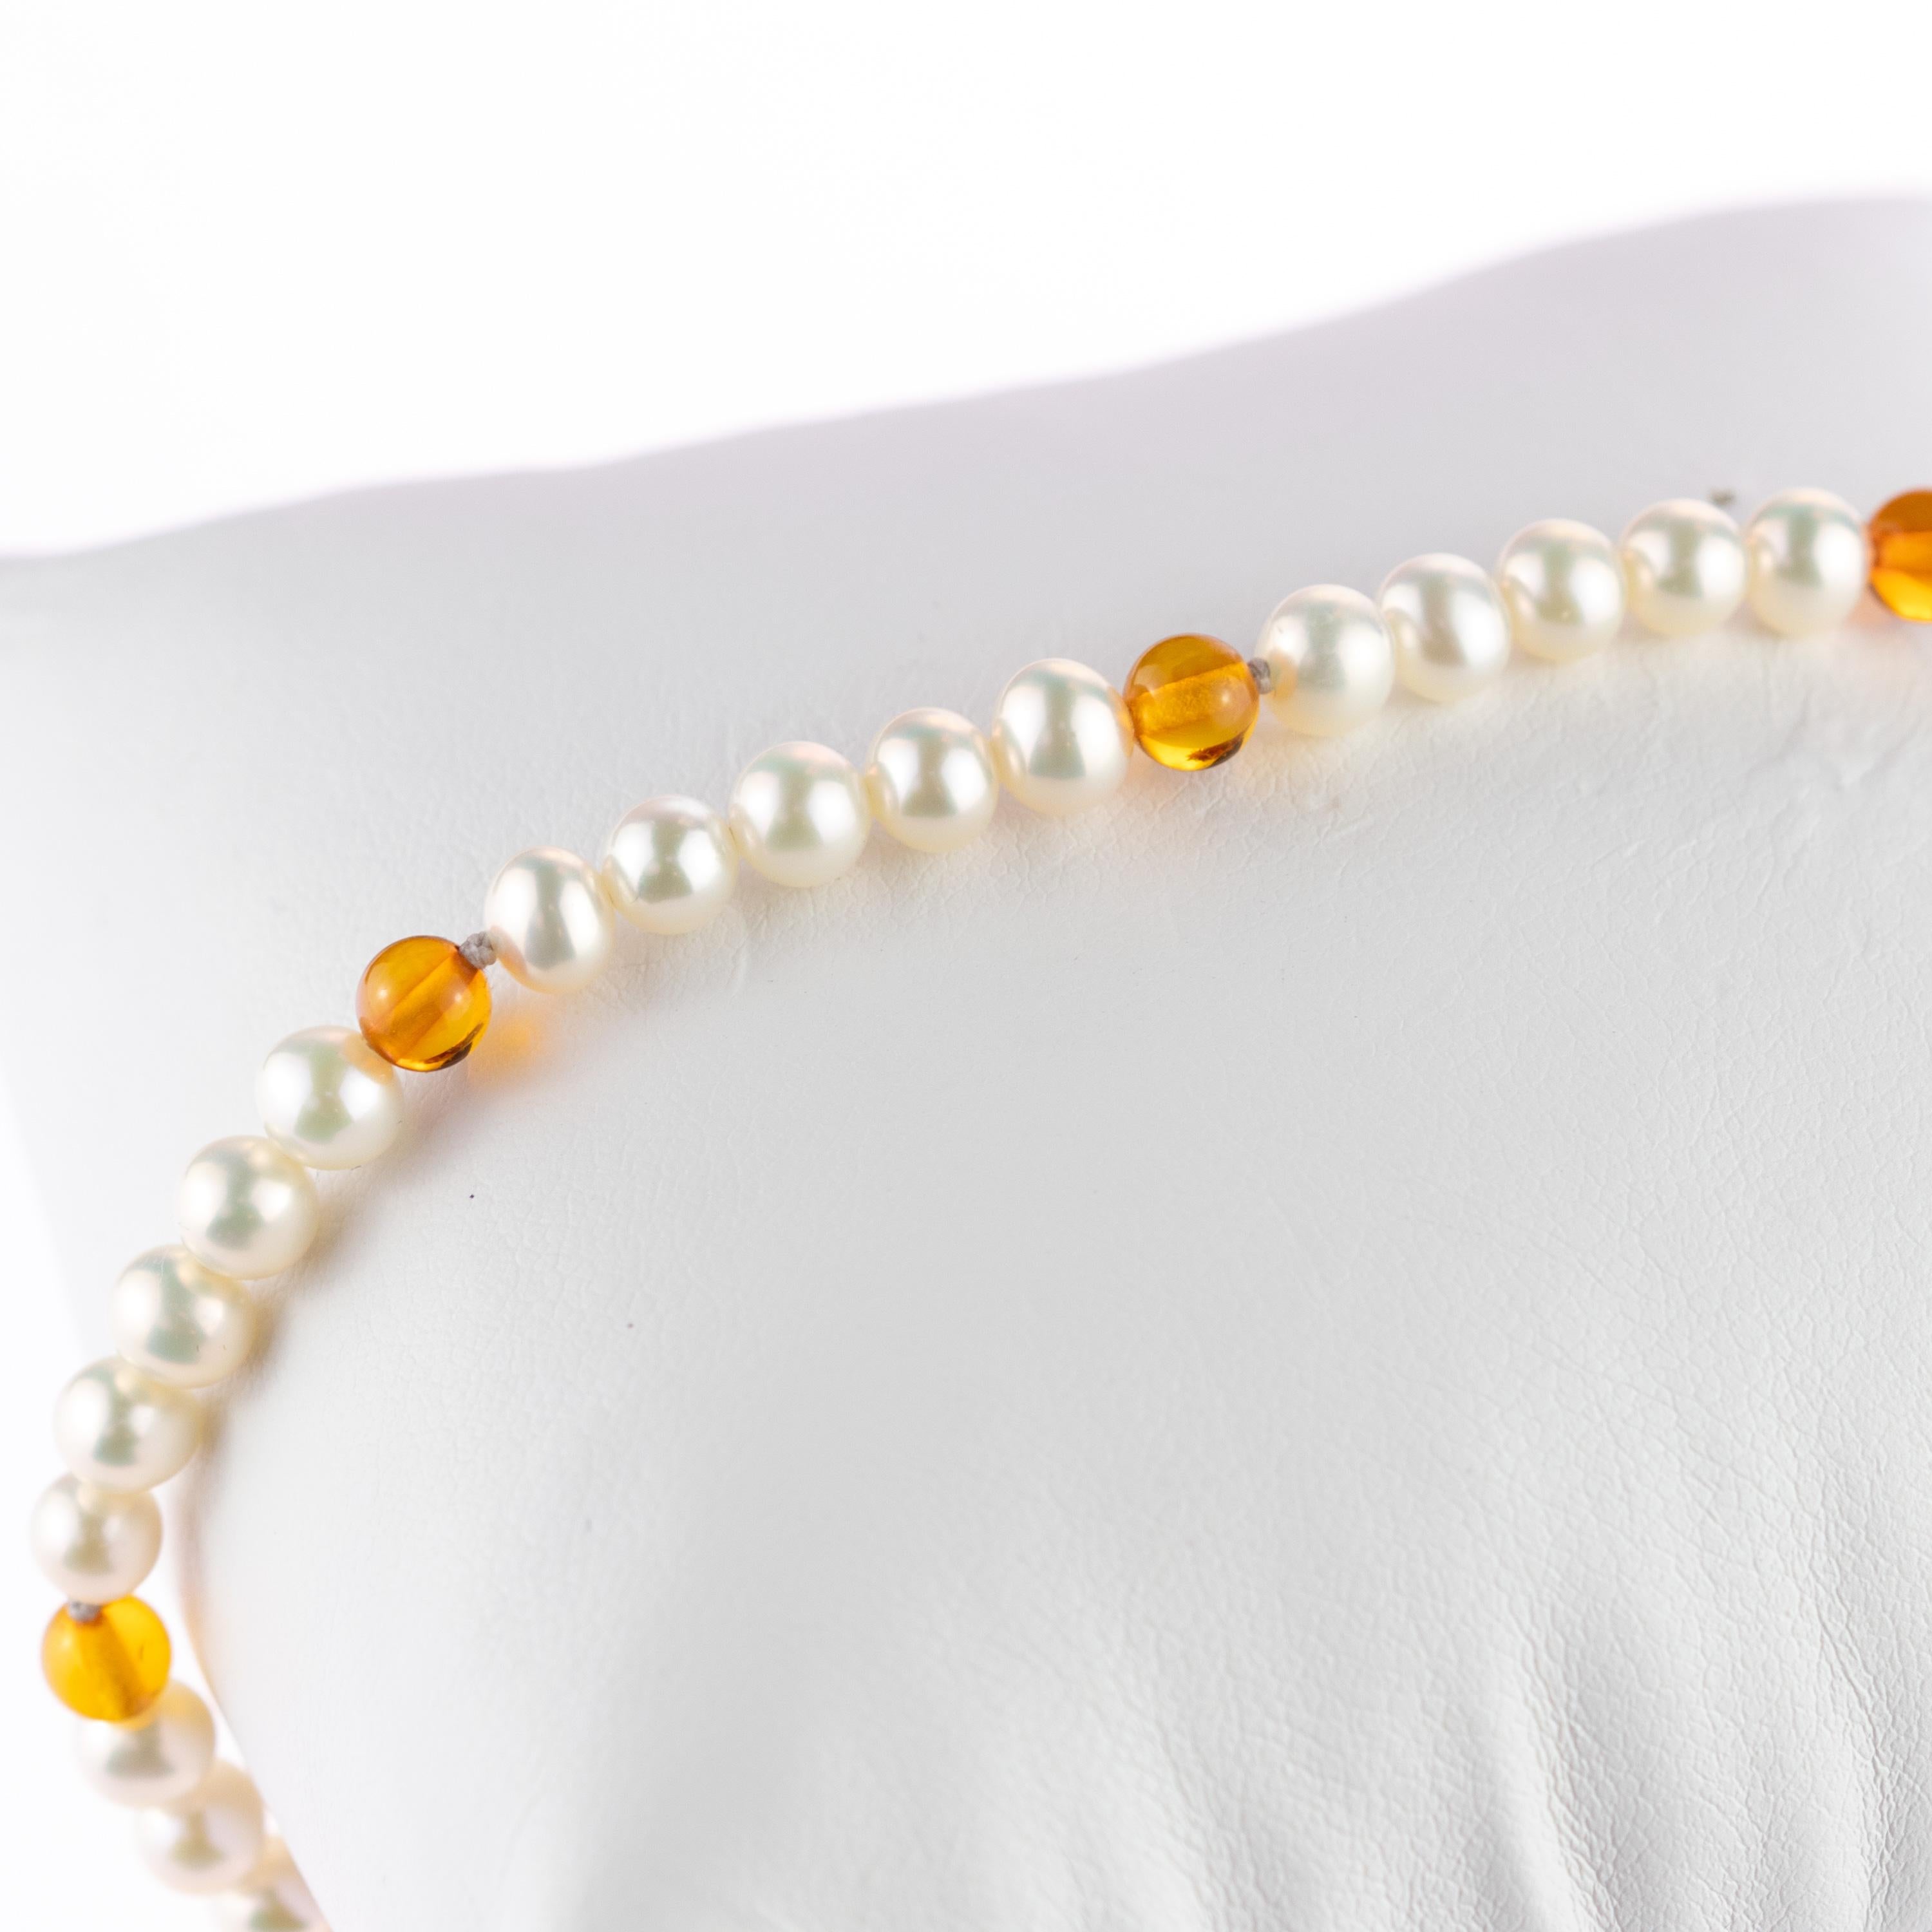 Baltic amber and luminous pearls scattered along a delicate bracelet. 9 karat rose gold, 27 beads of freshwater pearls and 10 beads of baltic natural amber.  A fresh look that highlights any outfit, day or night. For a passionate and energetic